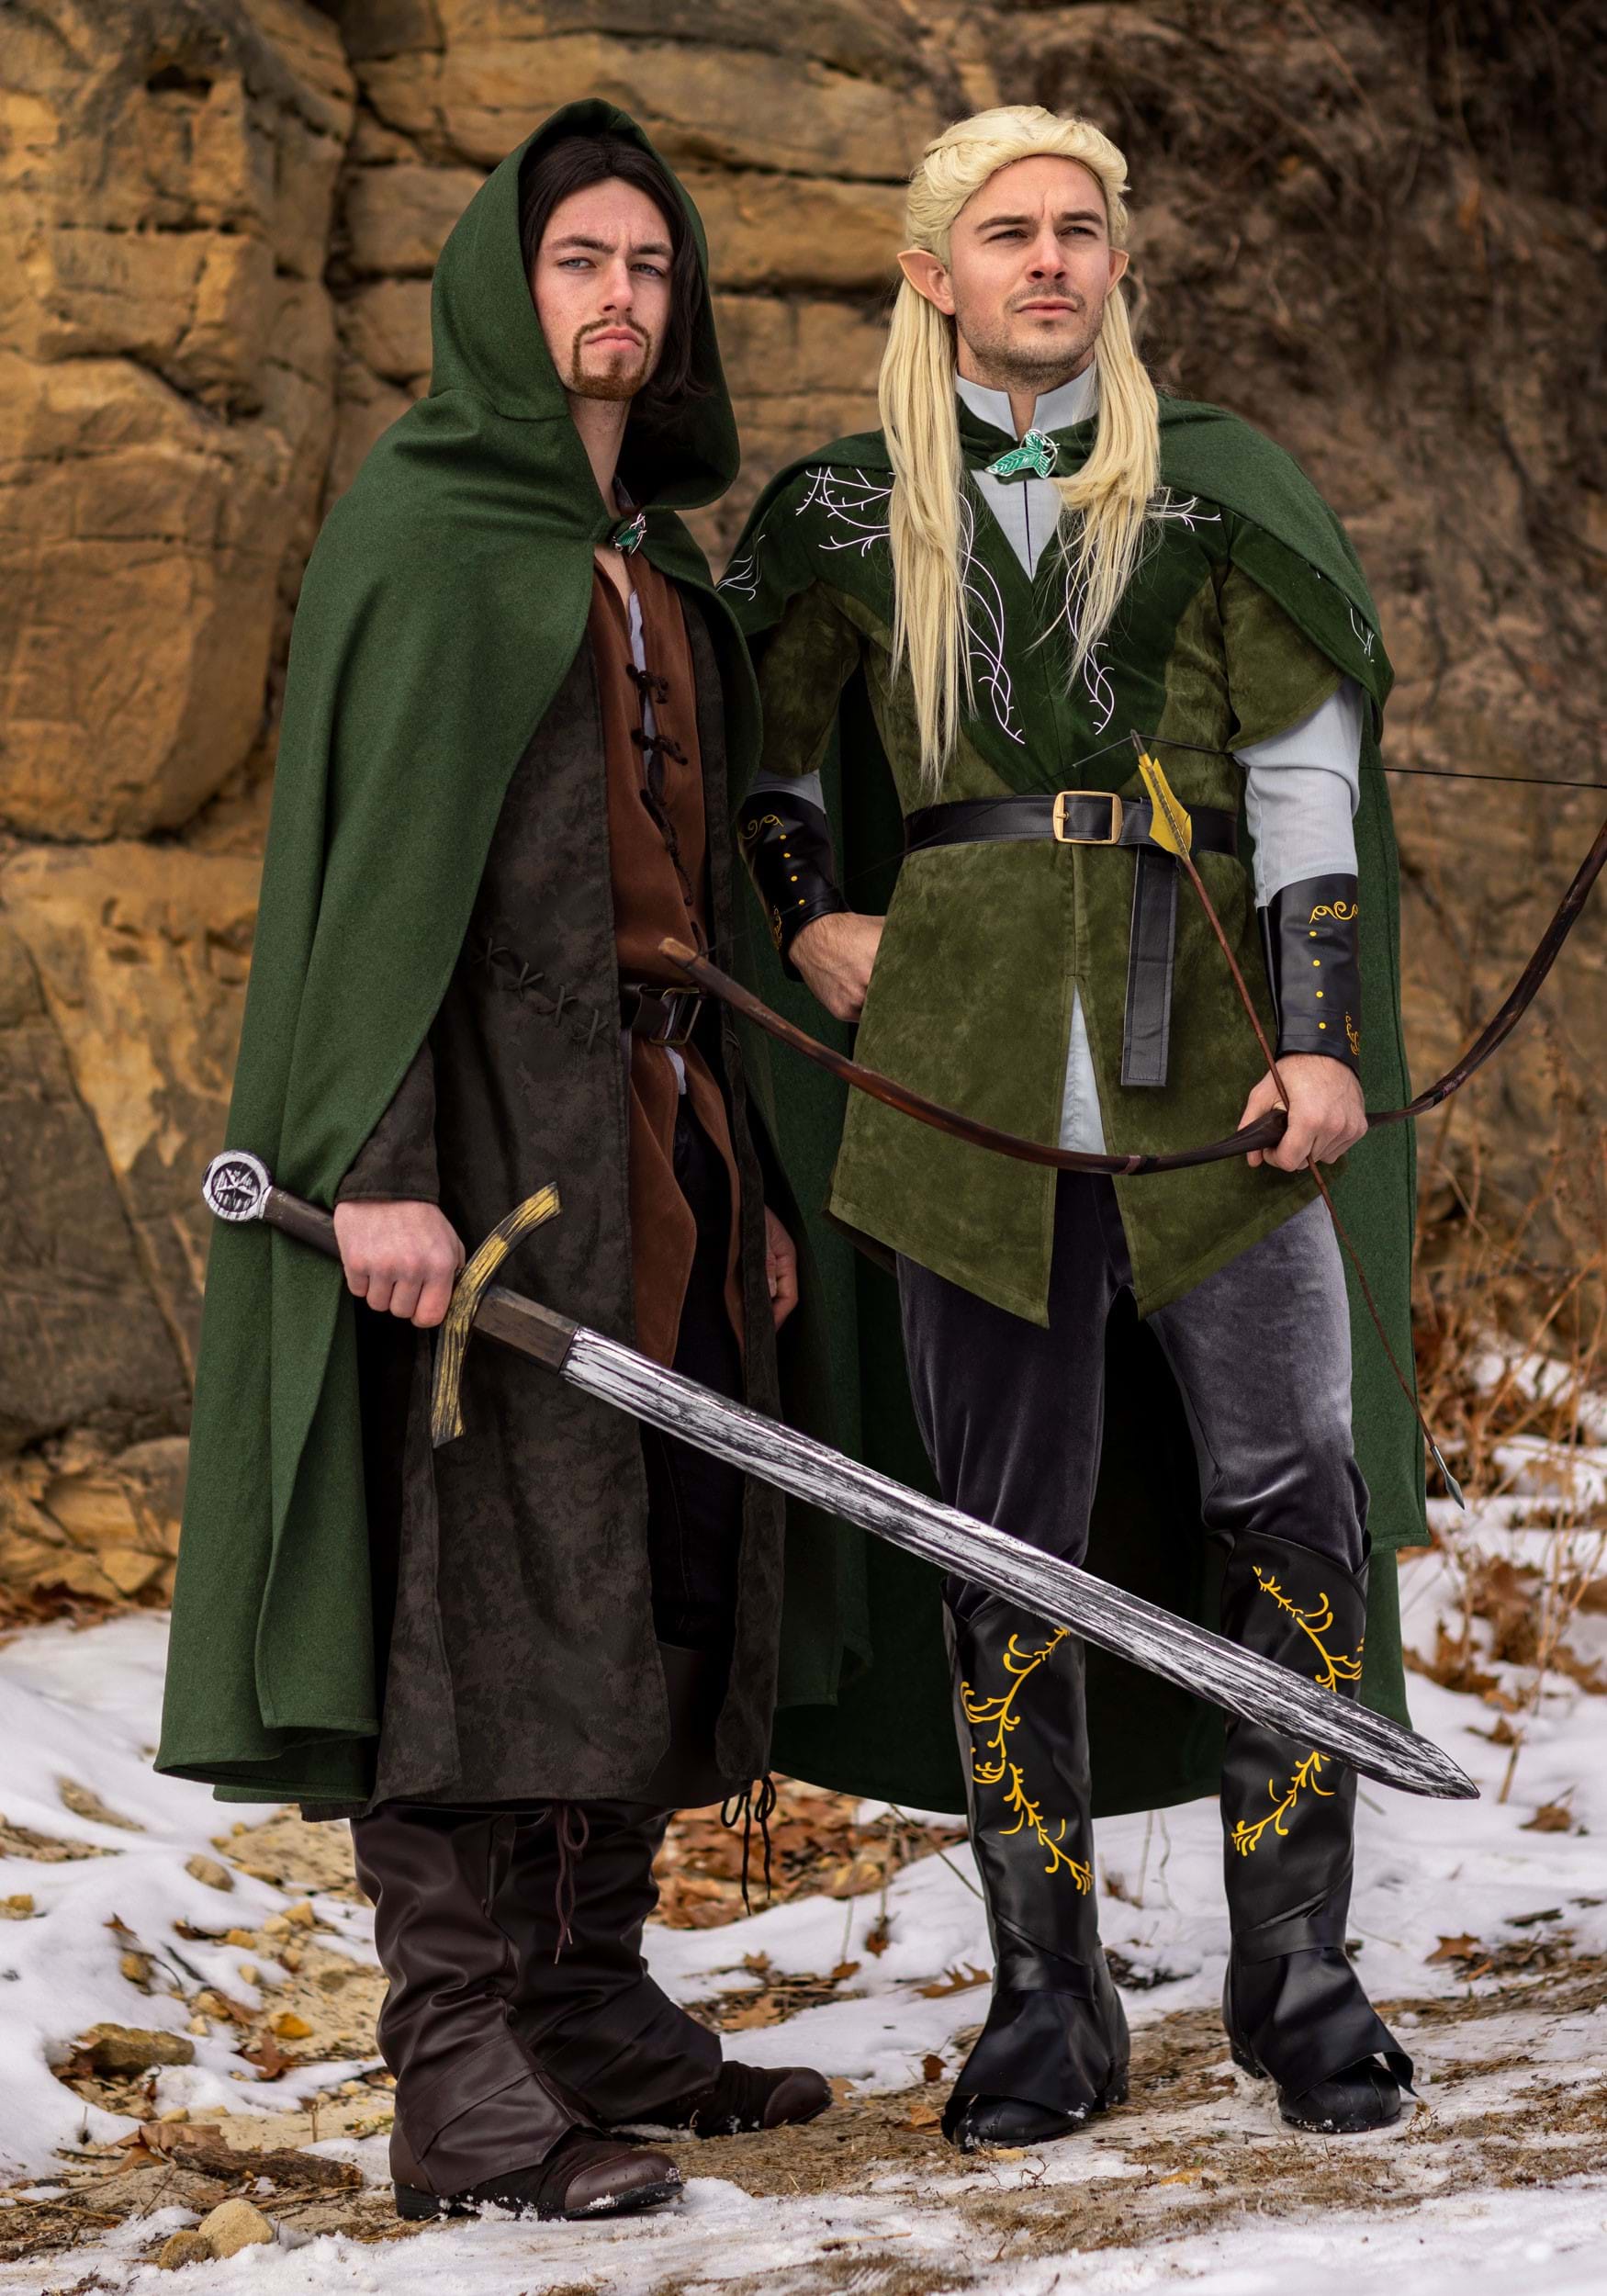 Aragorn Lord of the Rings Costume for Men two